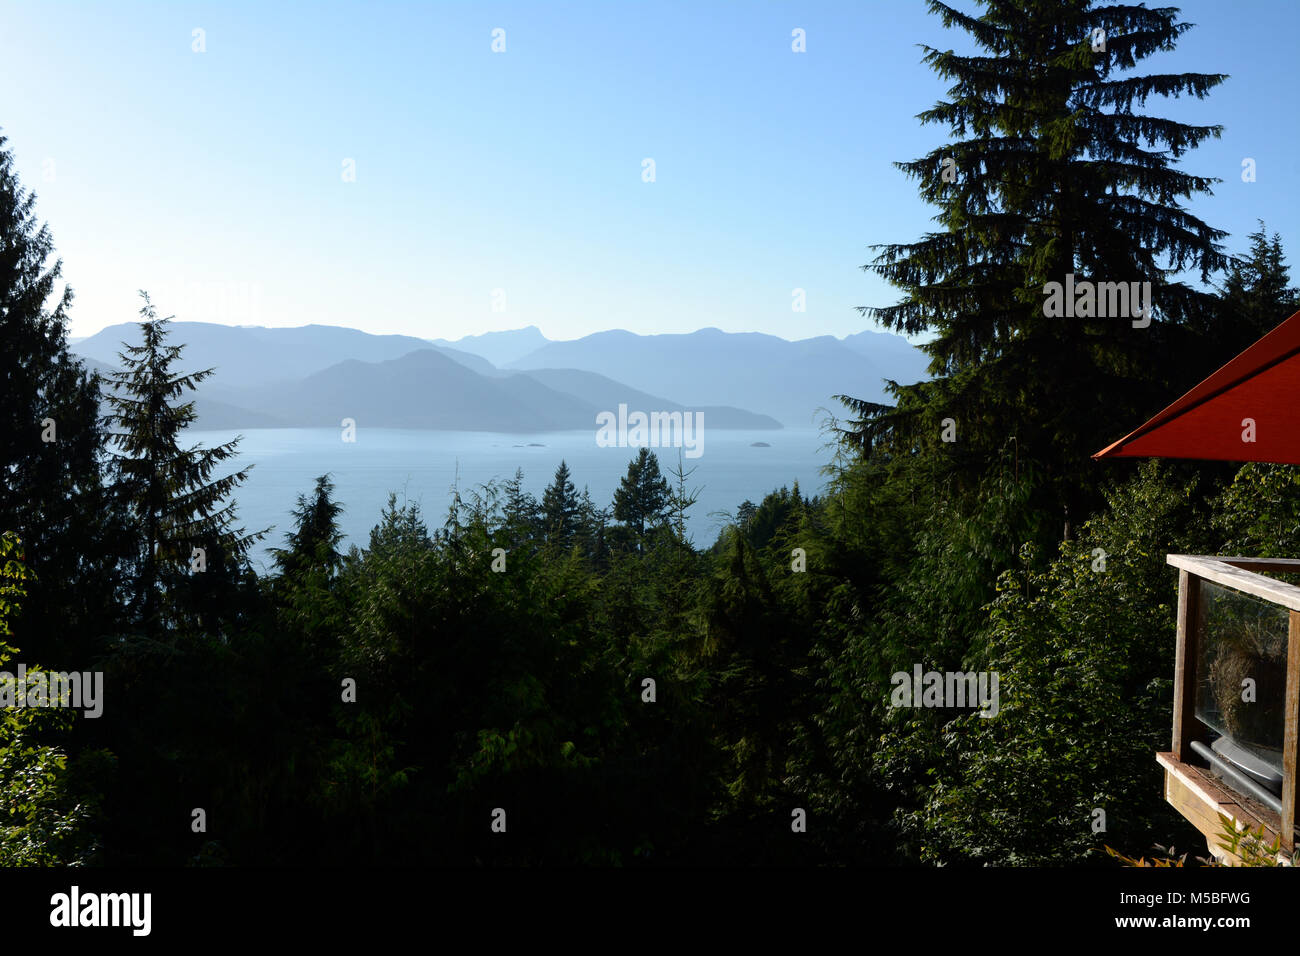 A view of Howe Sound and the mountains of Gambler Island and the mainland coast in silhouette, seen from Lions Bay, British Columbia, Canada. Stock Photo